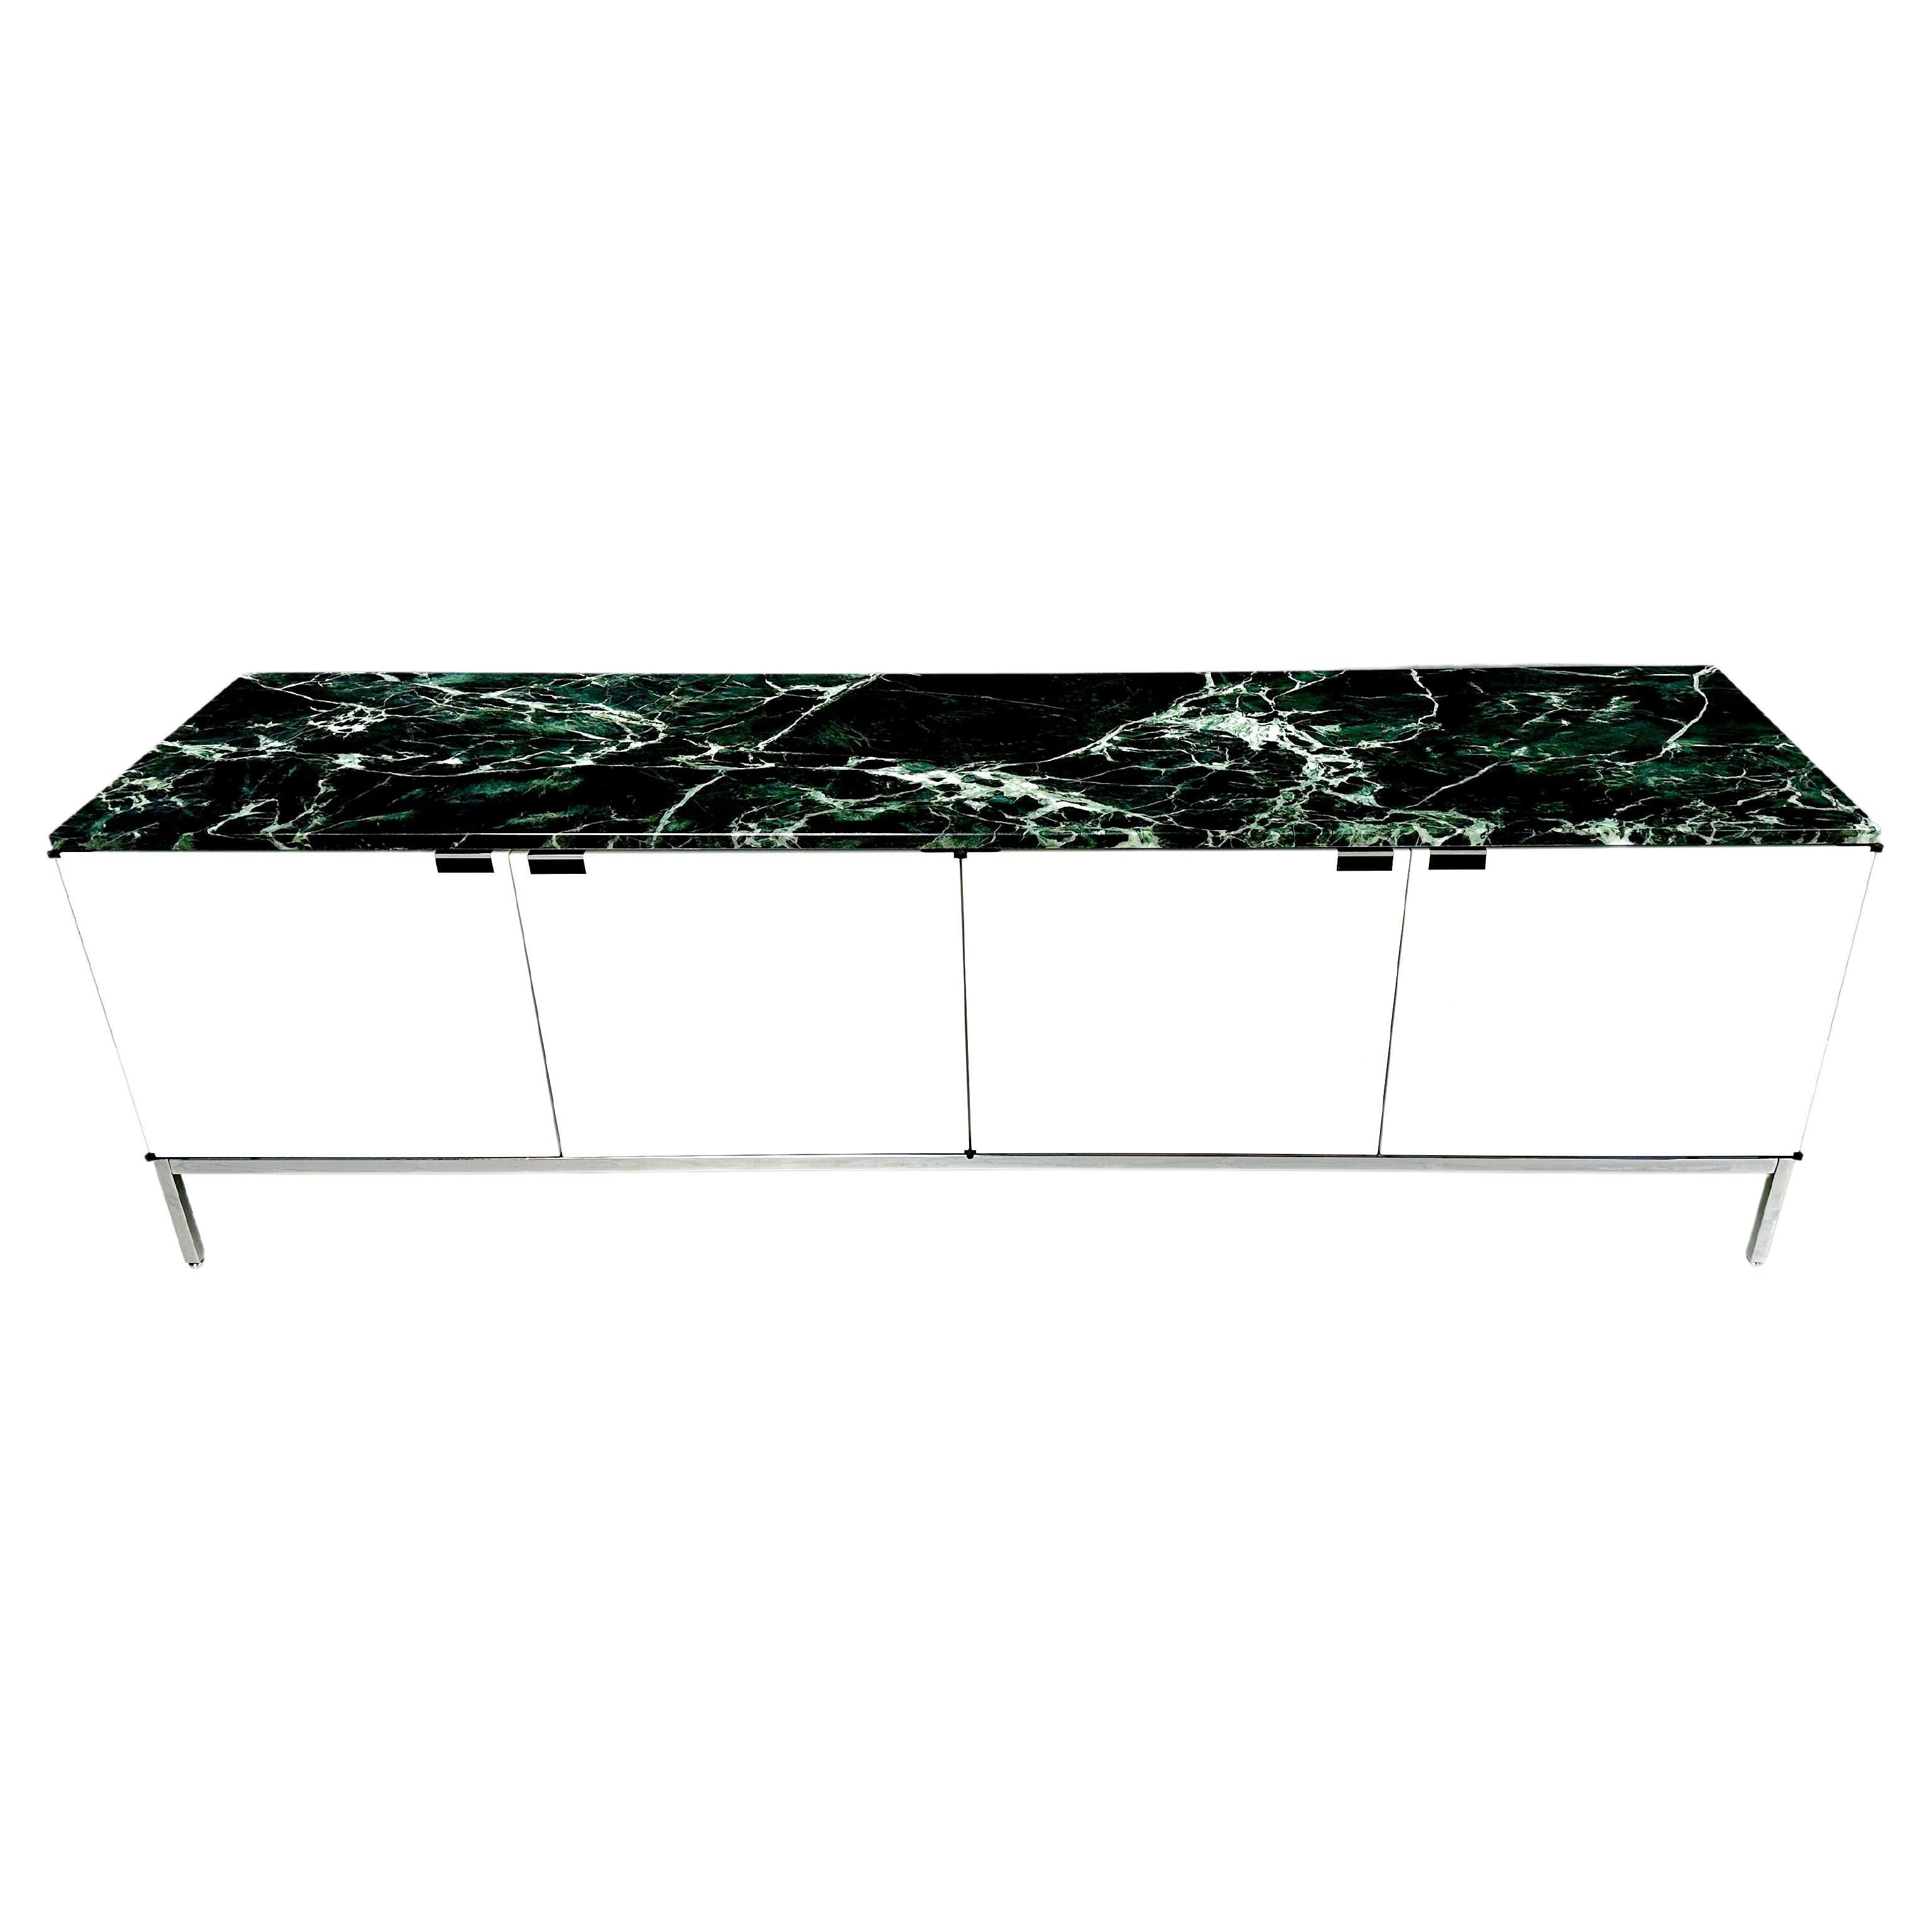 Florence Knoll Credenza New Edition with Alpi Verdi Marble Top, 2010s For Sale